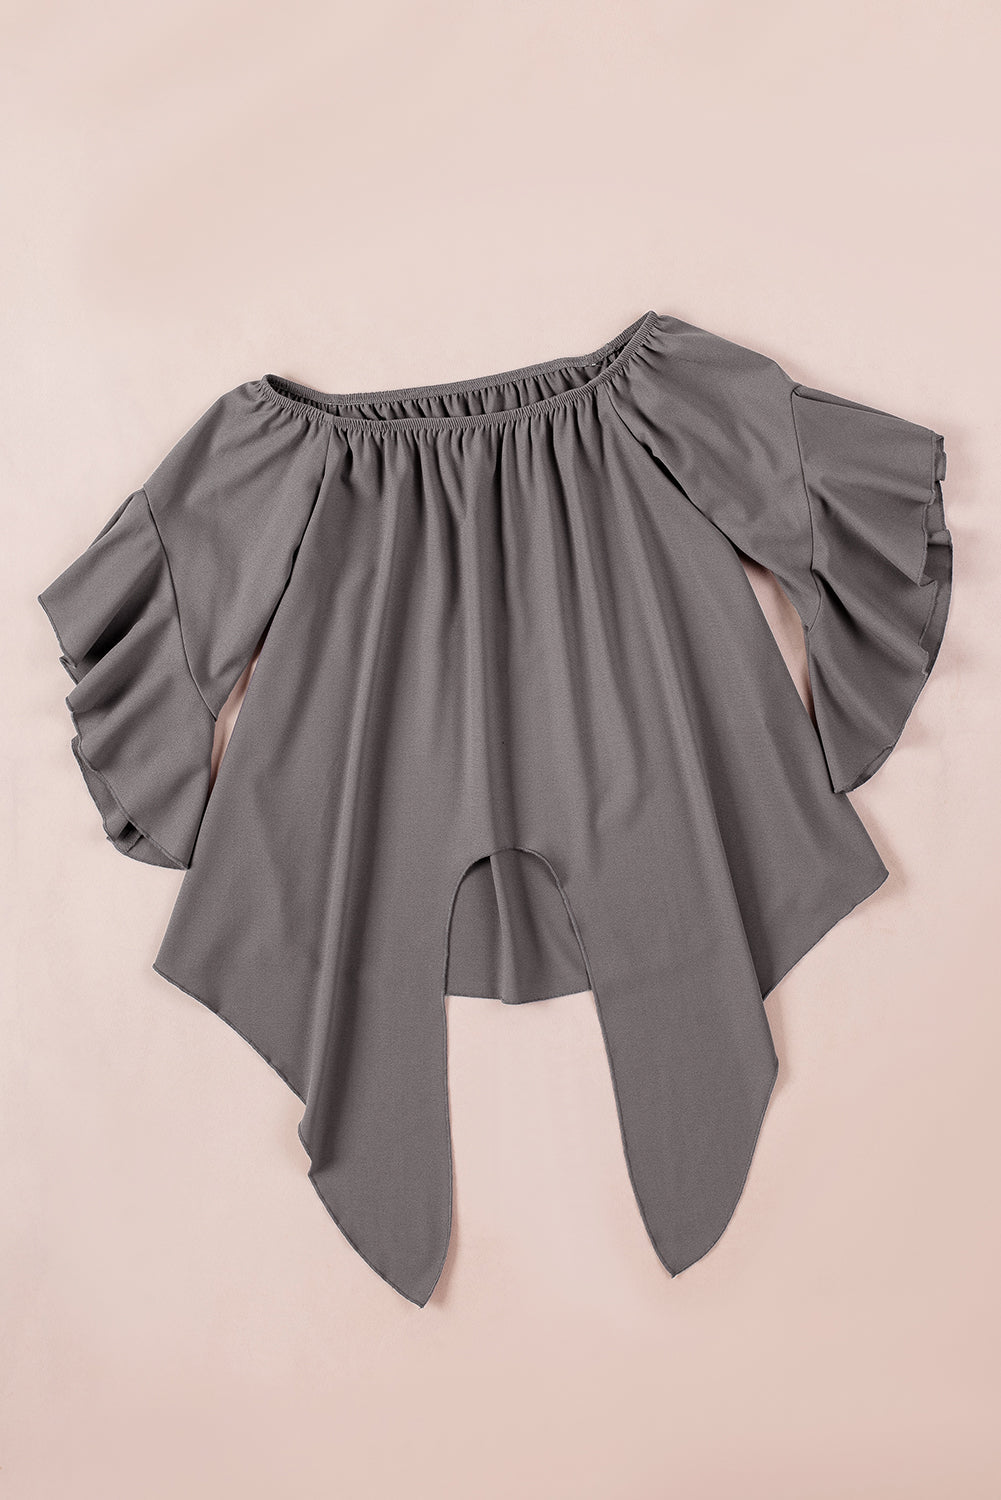 Off-Shoulder Tie Hem Blouse - Gray / S - Women’s Clothing & Accessories - Shirts & Tops - 10 - 2024